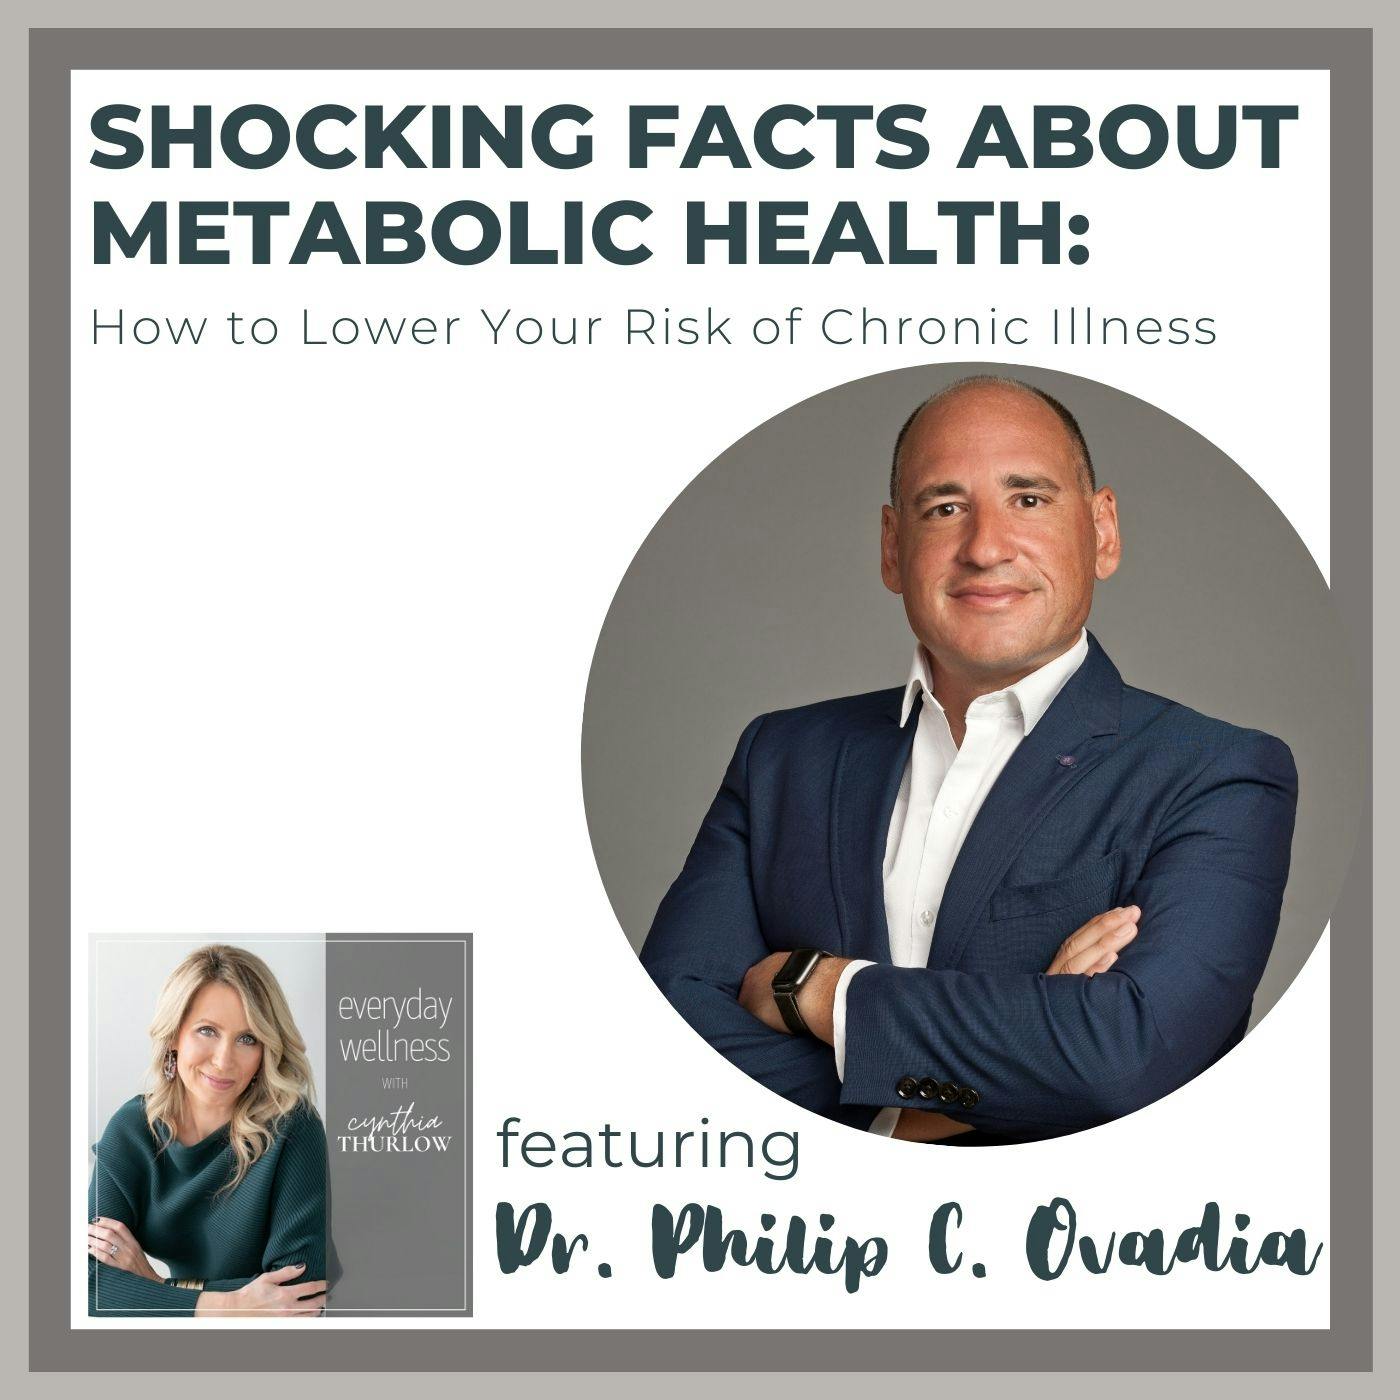 Ep. 179 Shocking Facts About Metabolic Health: How to Lower Your Risk of Chronic Illness with Dr. Philip C. Ovadia